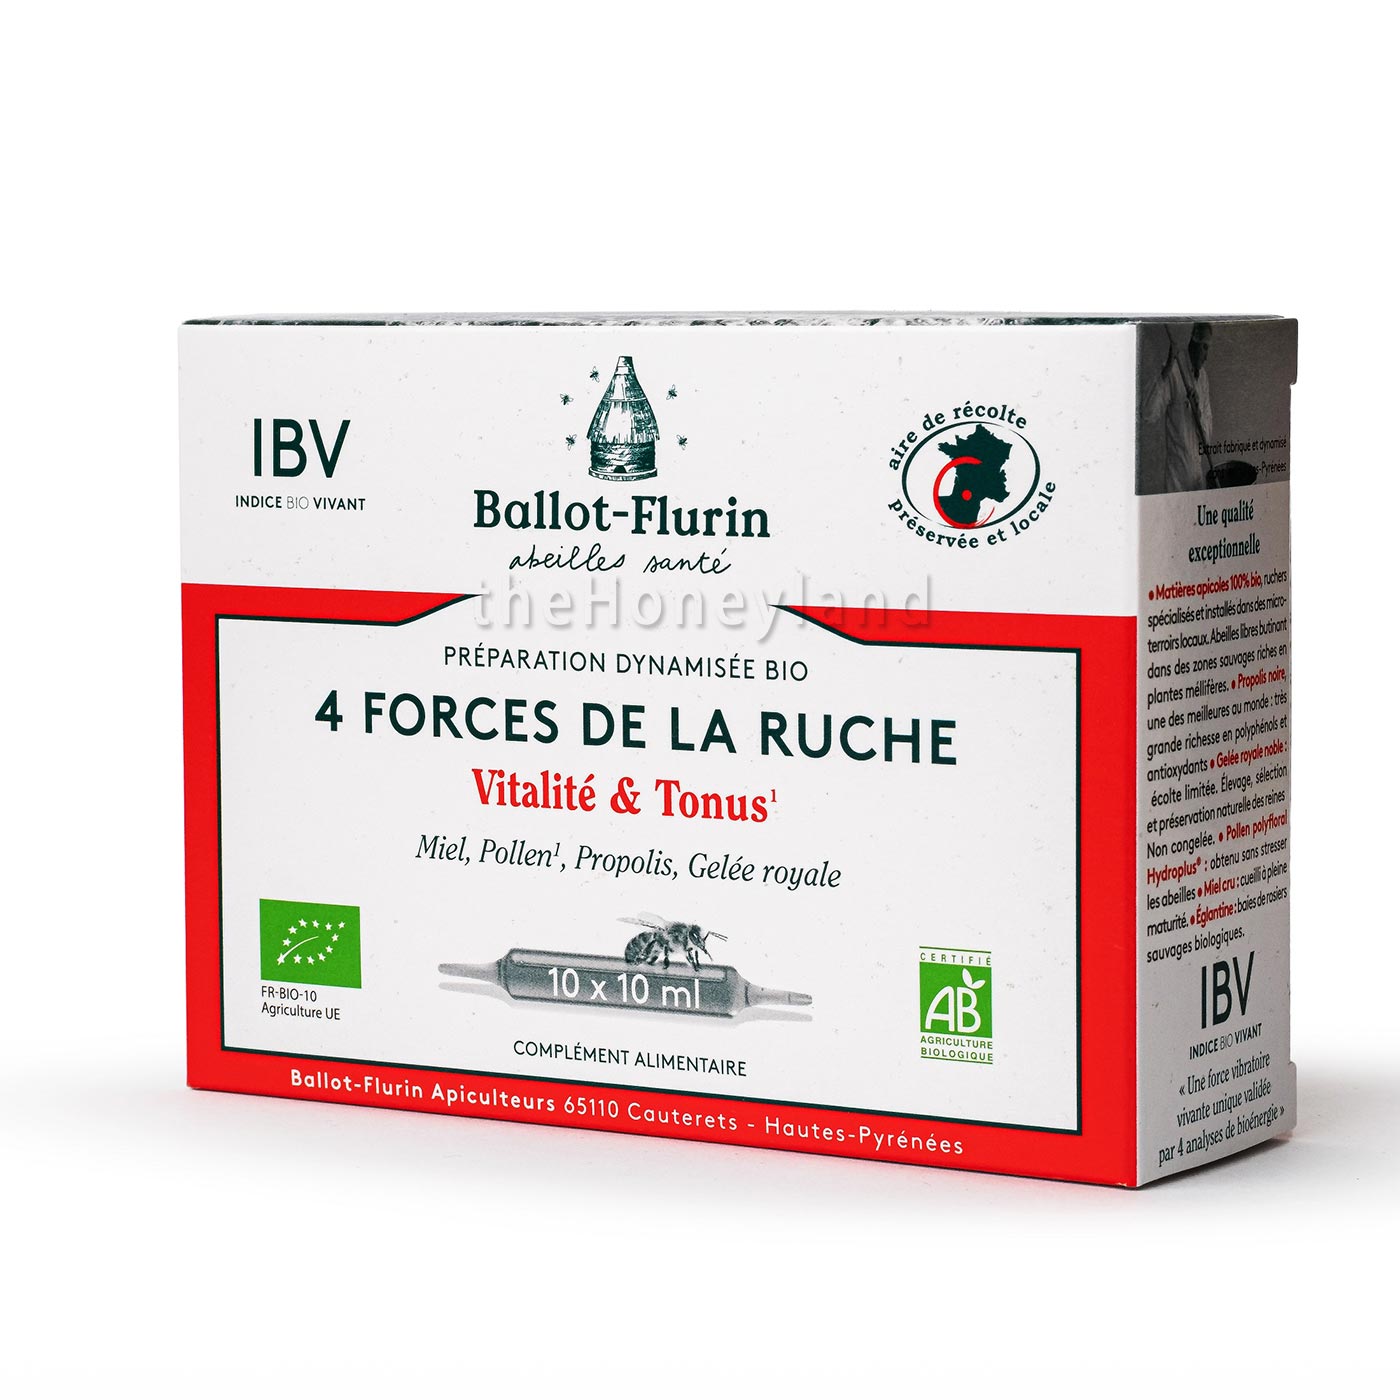 4 forces of the hive - supplement royal jelly, pollen, propolis